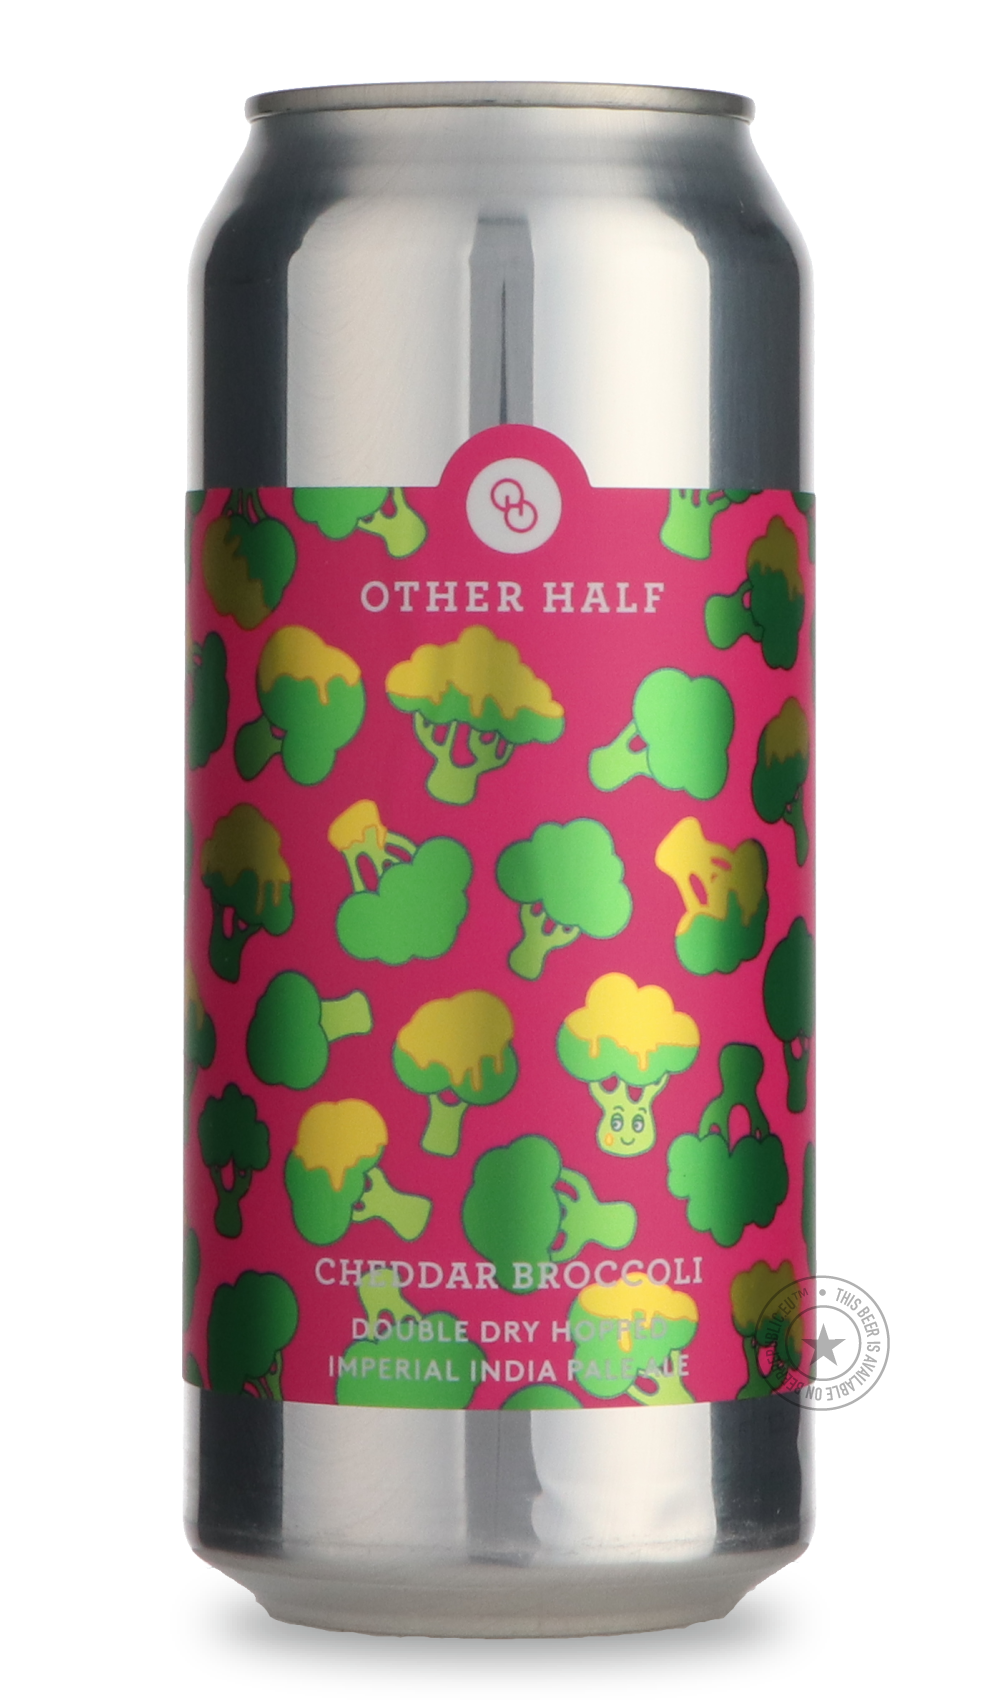 -Other Half- DDH Cheddar Broccoli-IPA- Only @ Beer Republic - The best online beer store for American & Canadian craft beer - Buy beer online from the USA and Canada - Bier online kopen - Amerikaans bier kopen - Craft beer store - Craft beer kopen - Amerikanisch bier kaufen - Bier online kaufen - Acheter biere online - IPA - Stout - Porter - New England IPA - Hazy IPA - Imperial Stout - Barrel Aged - Barrel Aged Imperial Stout - Brown - Dark beer - Blond - Blonde - Pilsner - Lager - Wheat - Weizen - Amber -